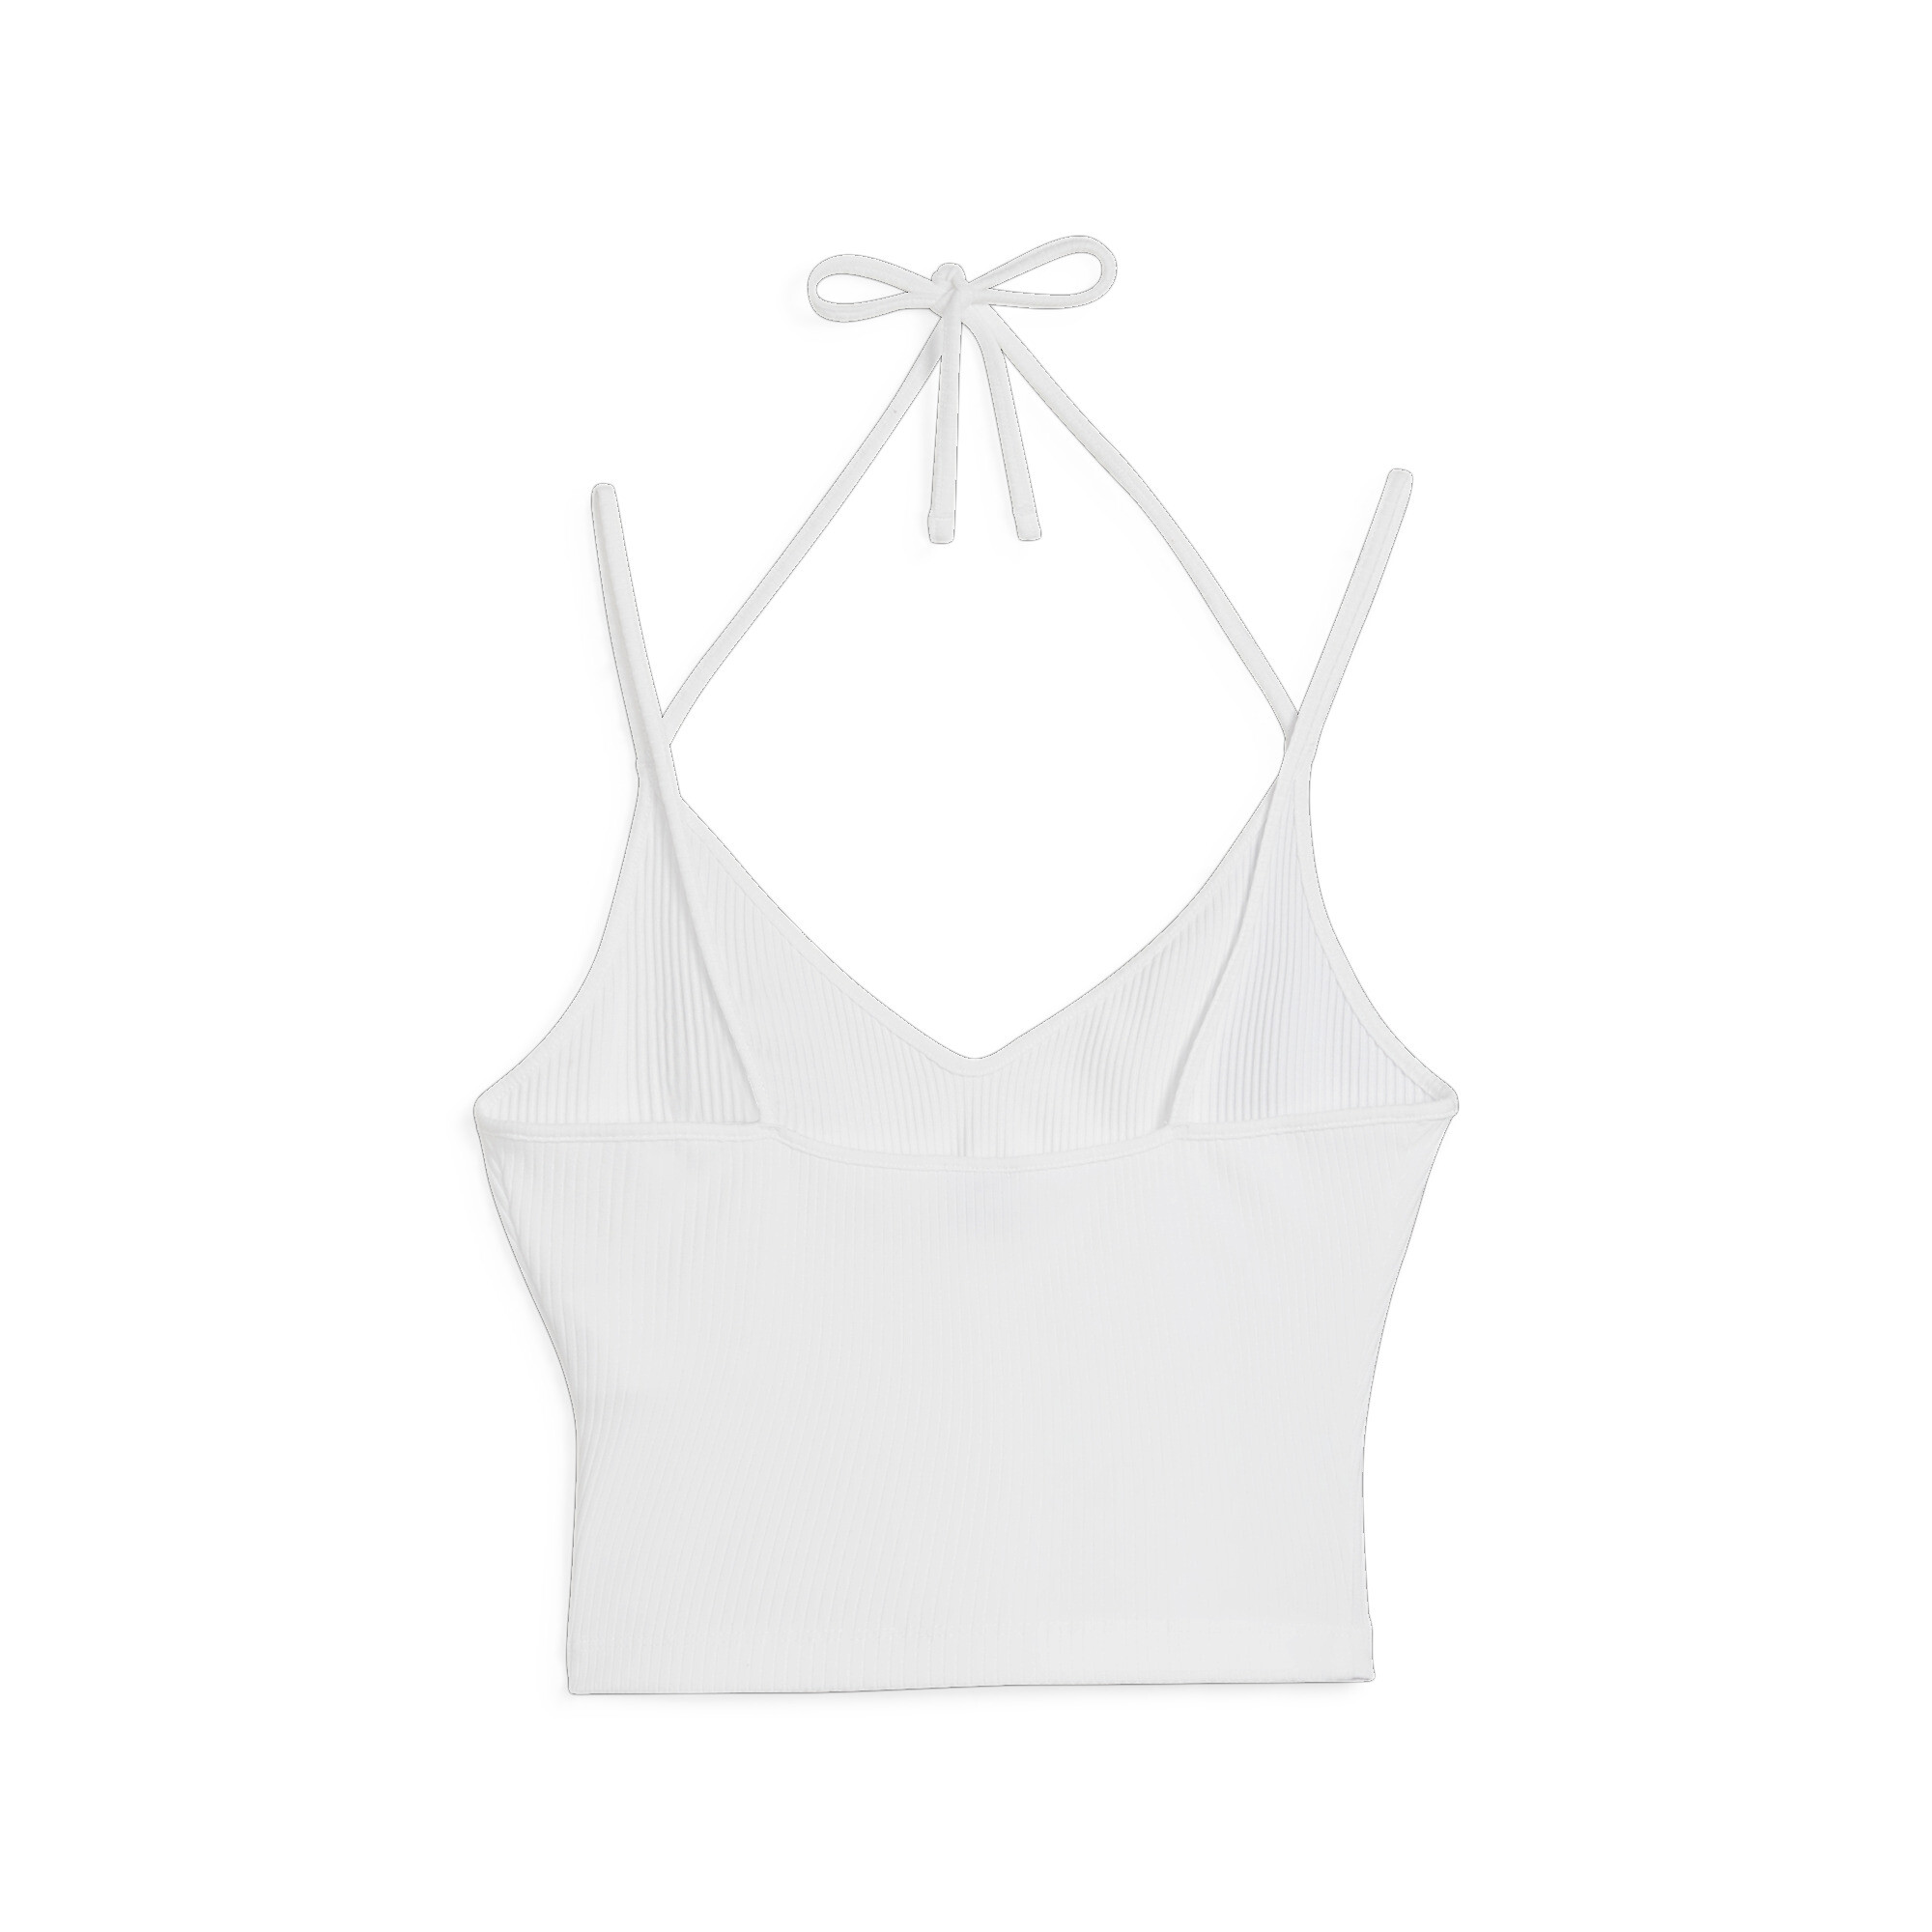 Women's PUMA CLASSICS Ribbed Crop Top In White, Size Large